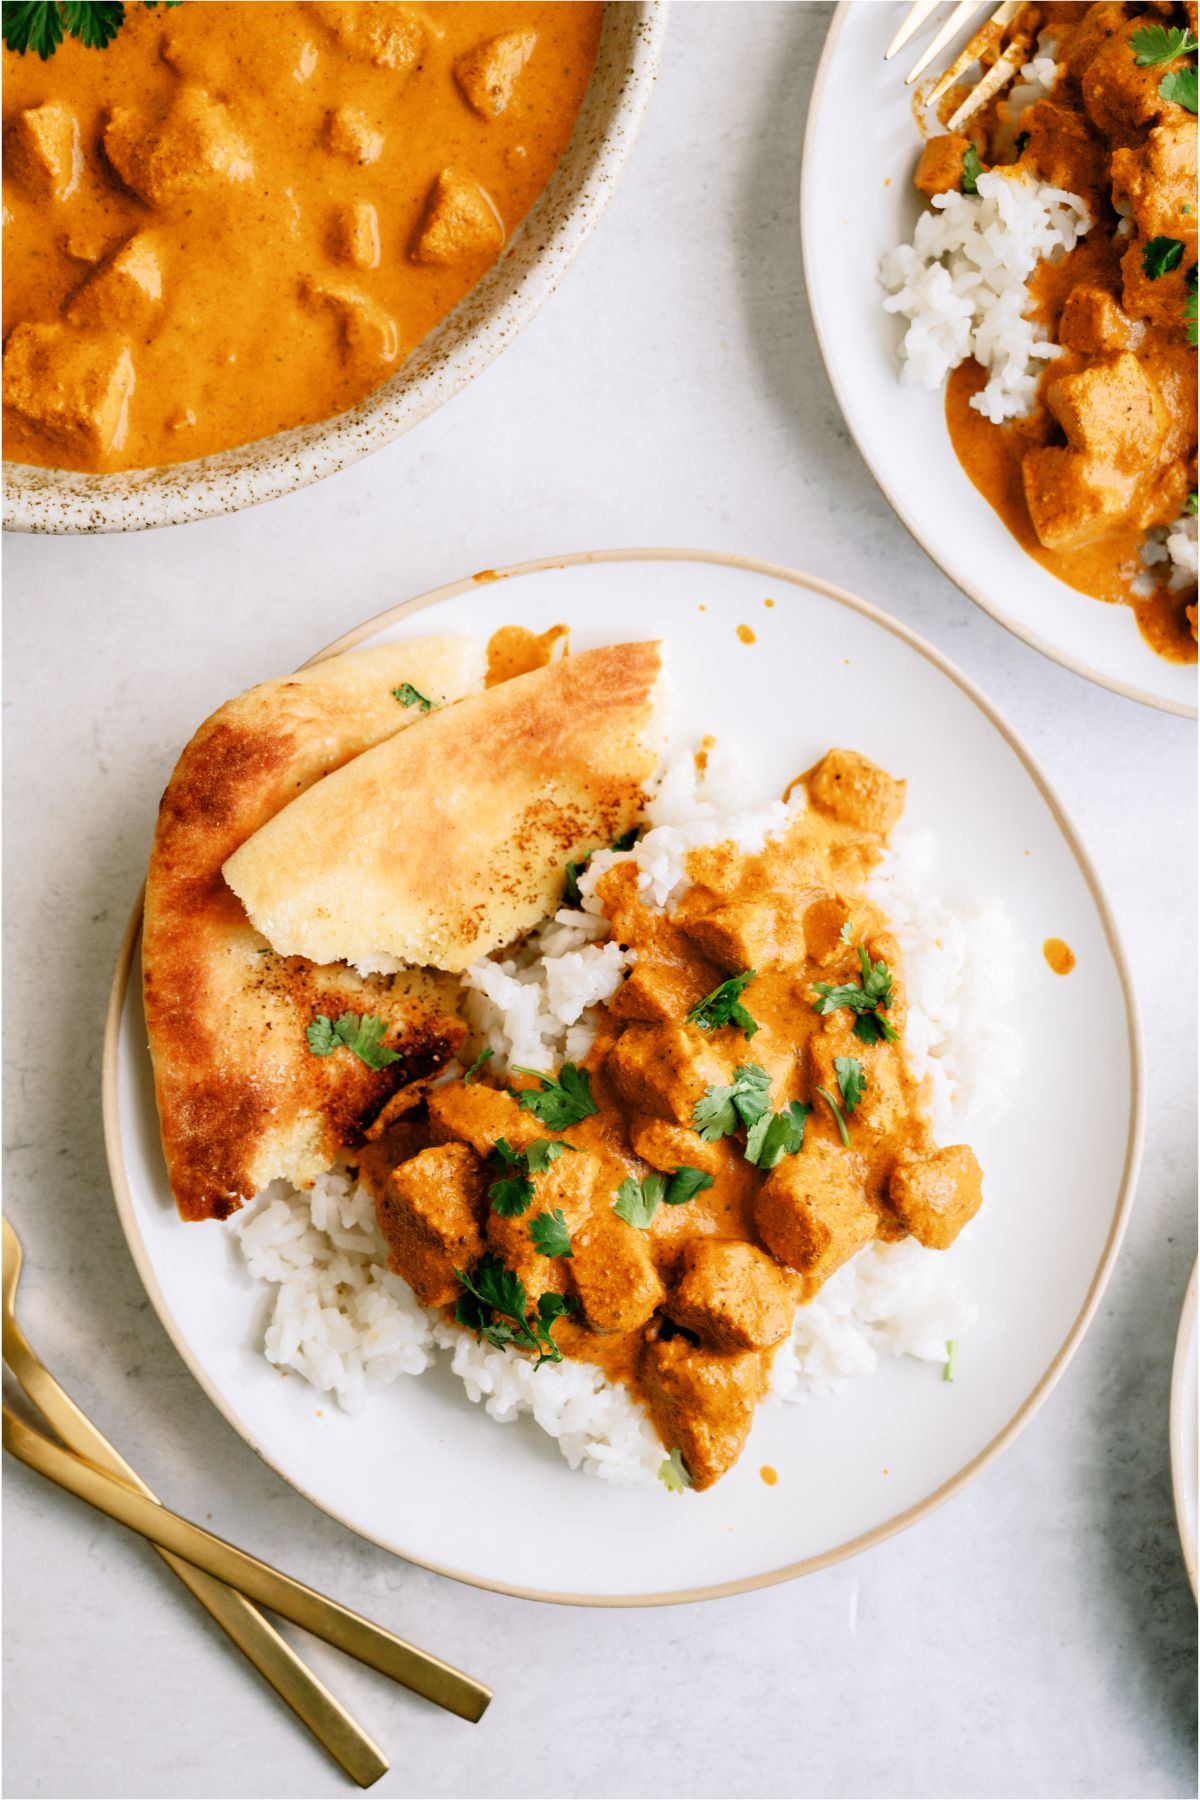 Top view of a plate with a serving of Instant Pot Chicken Tikka Masala over rice and naan bread